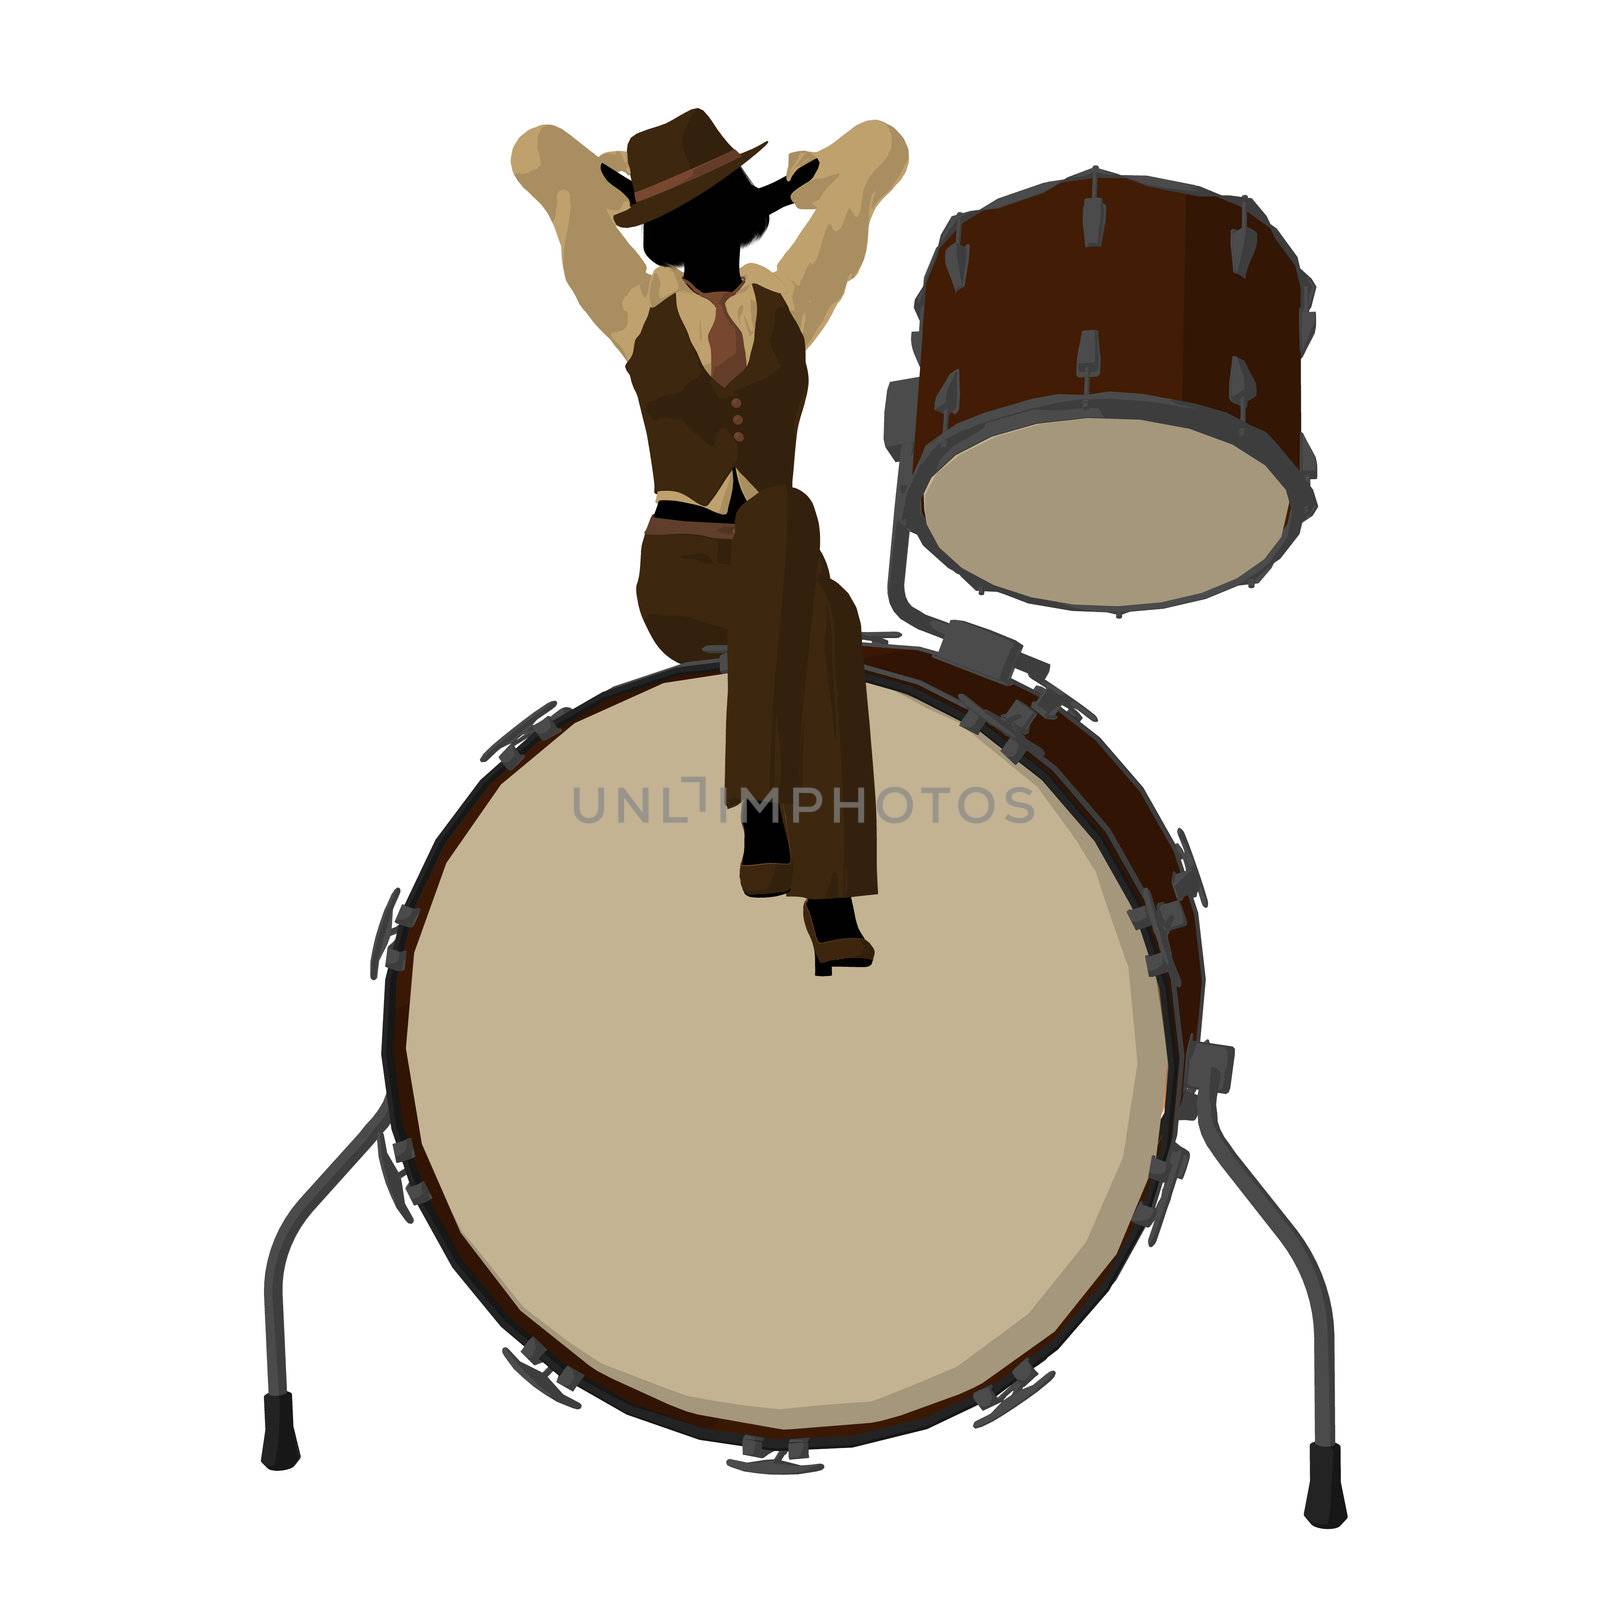 Female jazz player on drums on a white background